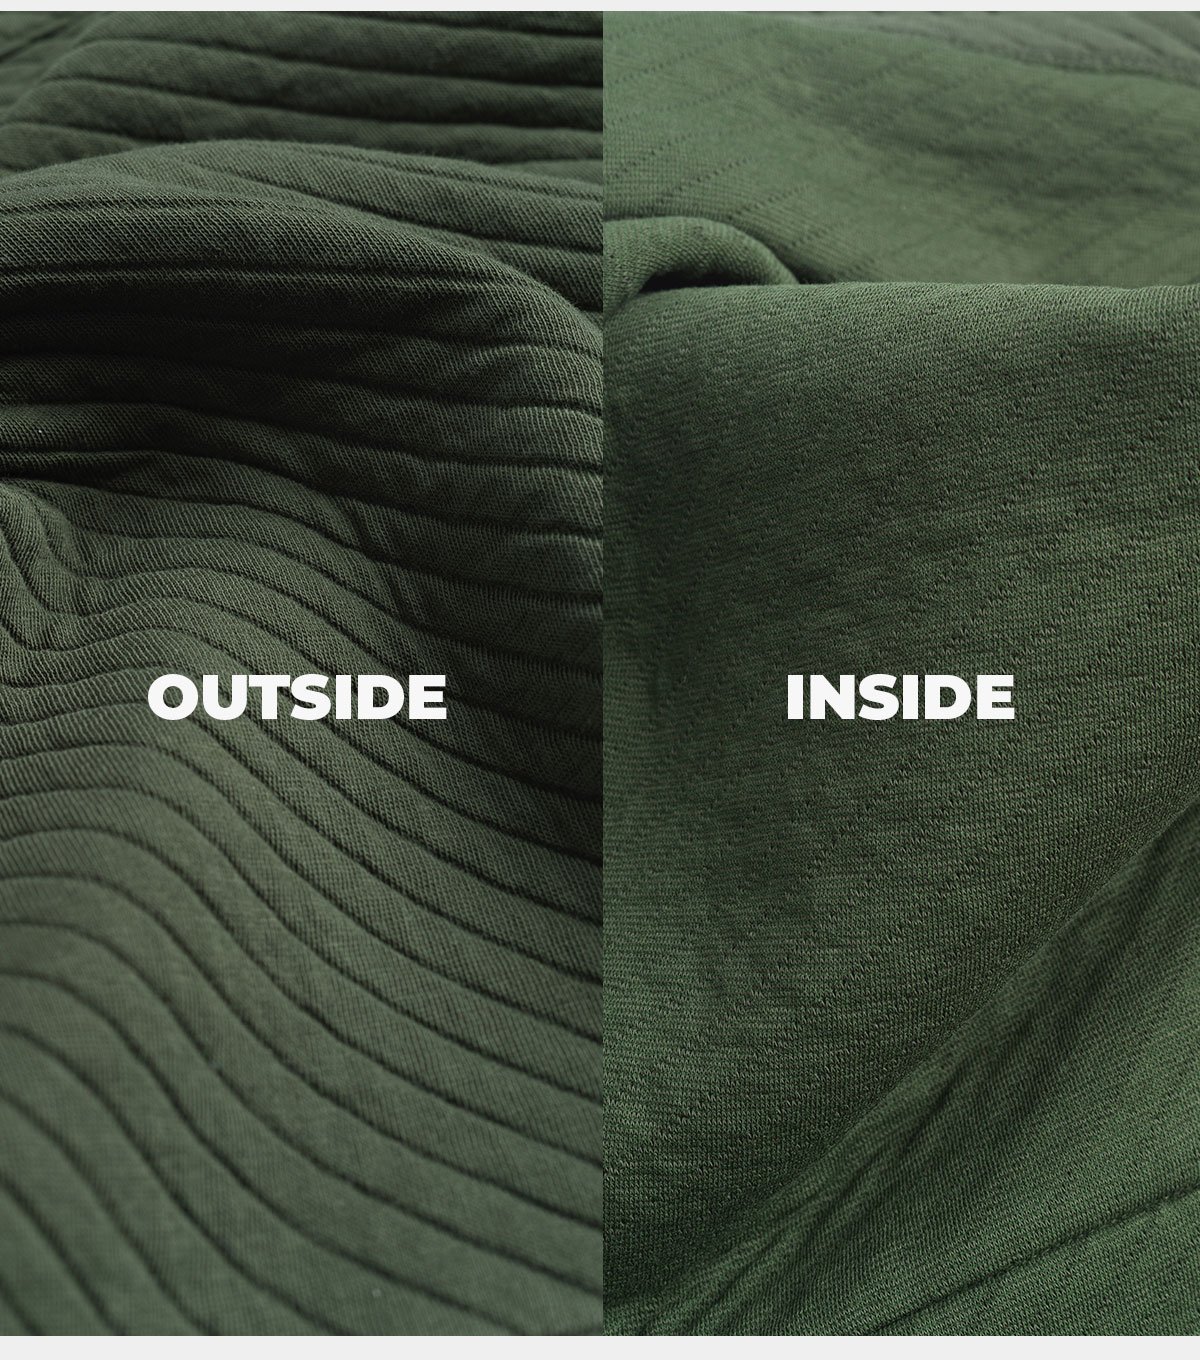 Outside texture, inside texture